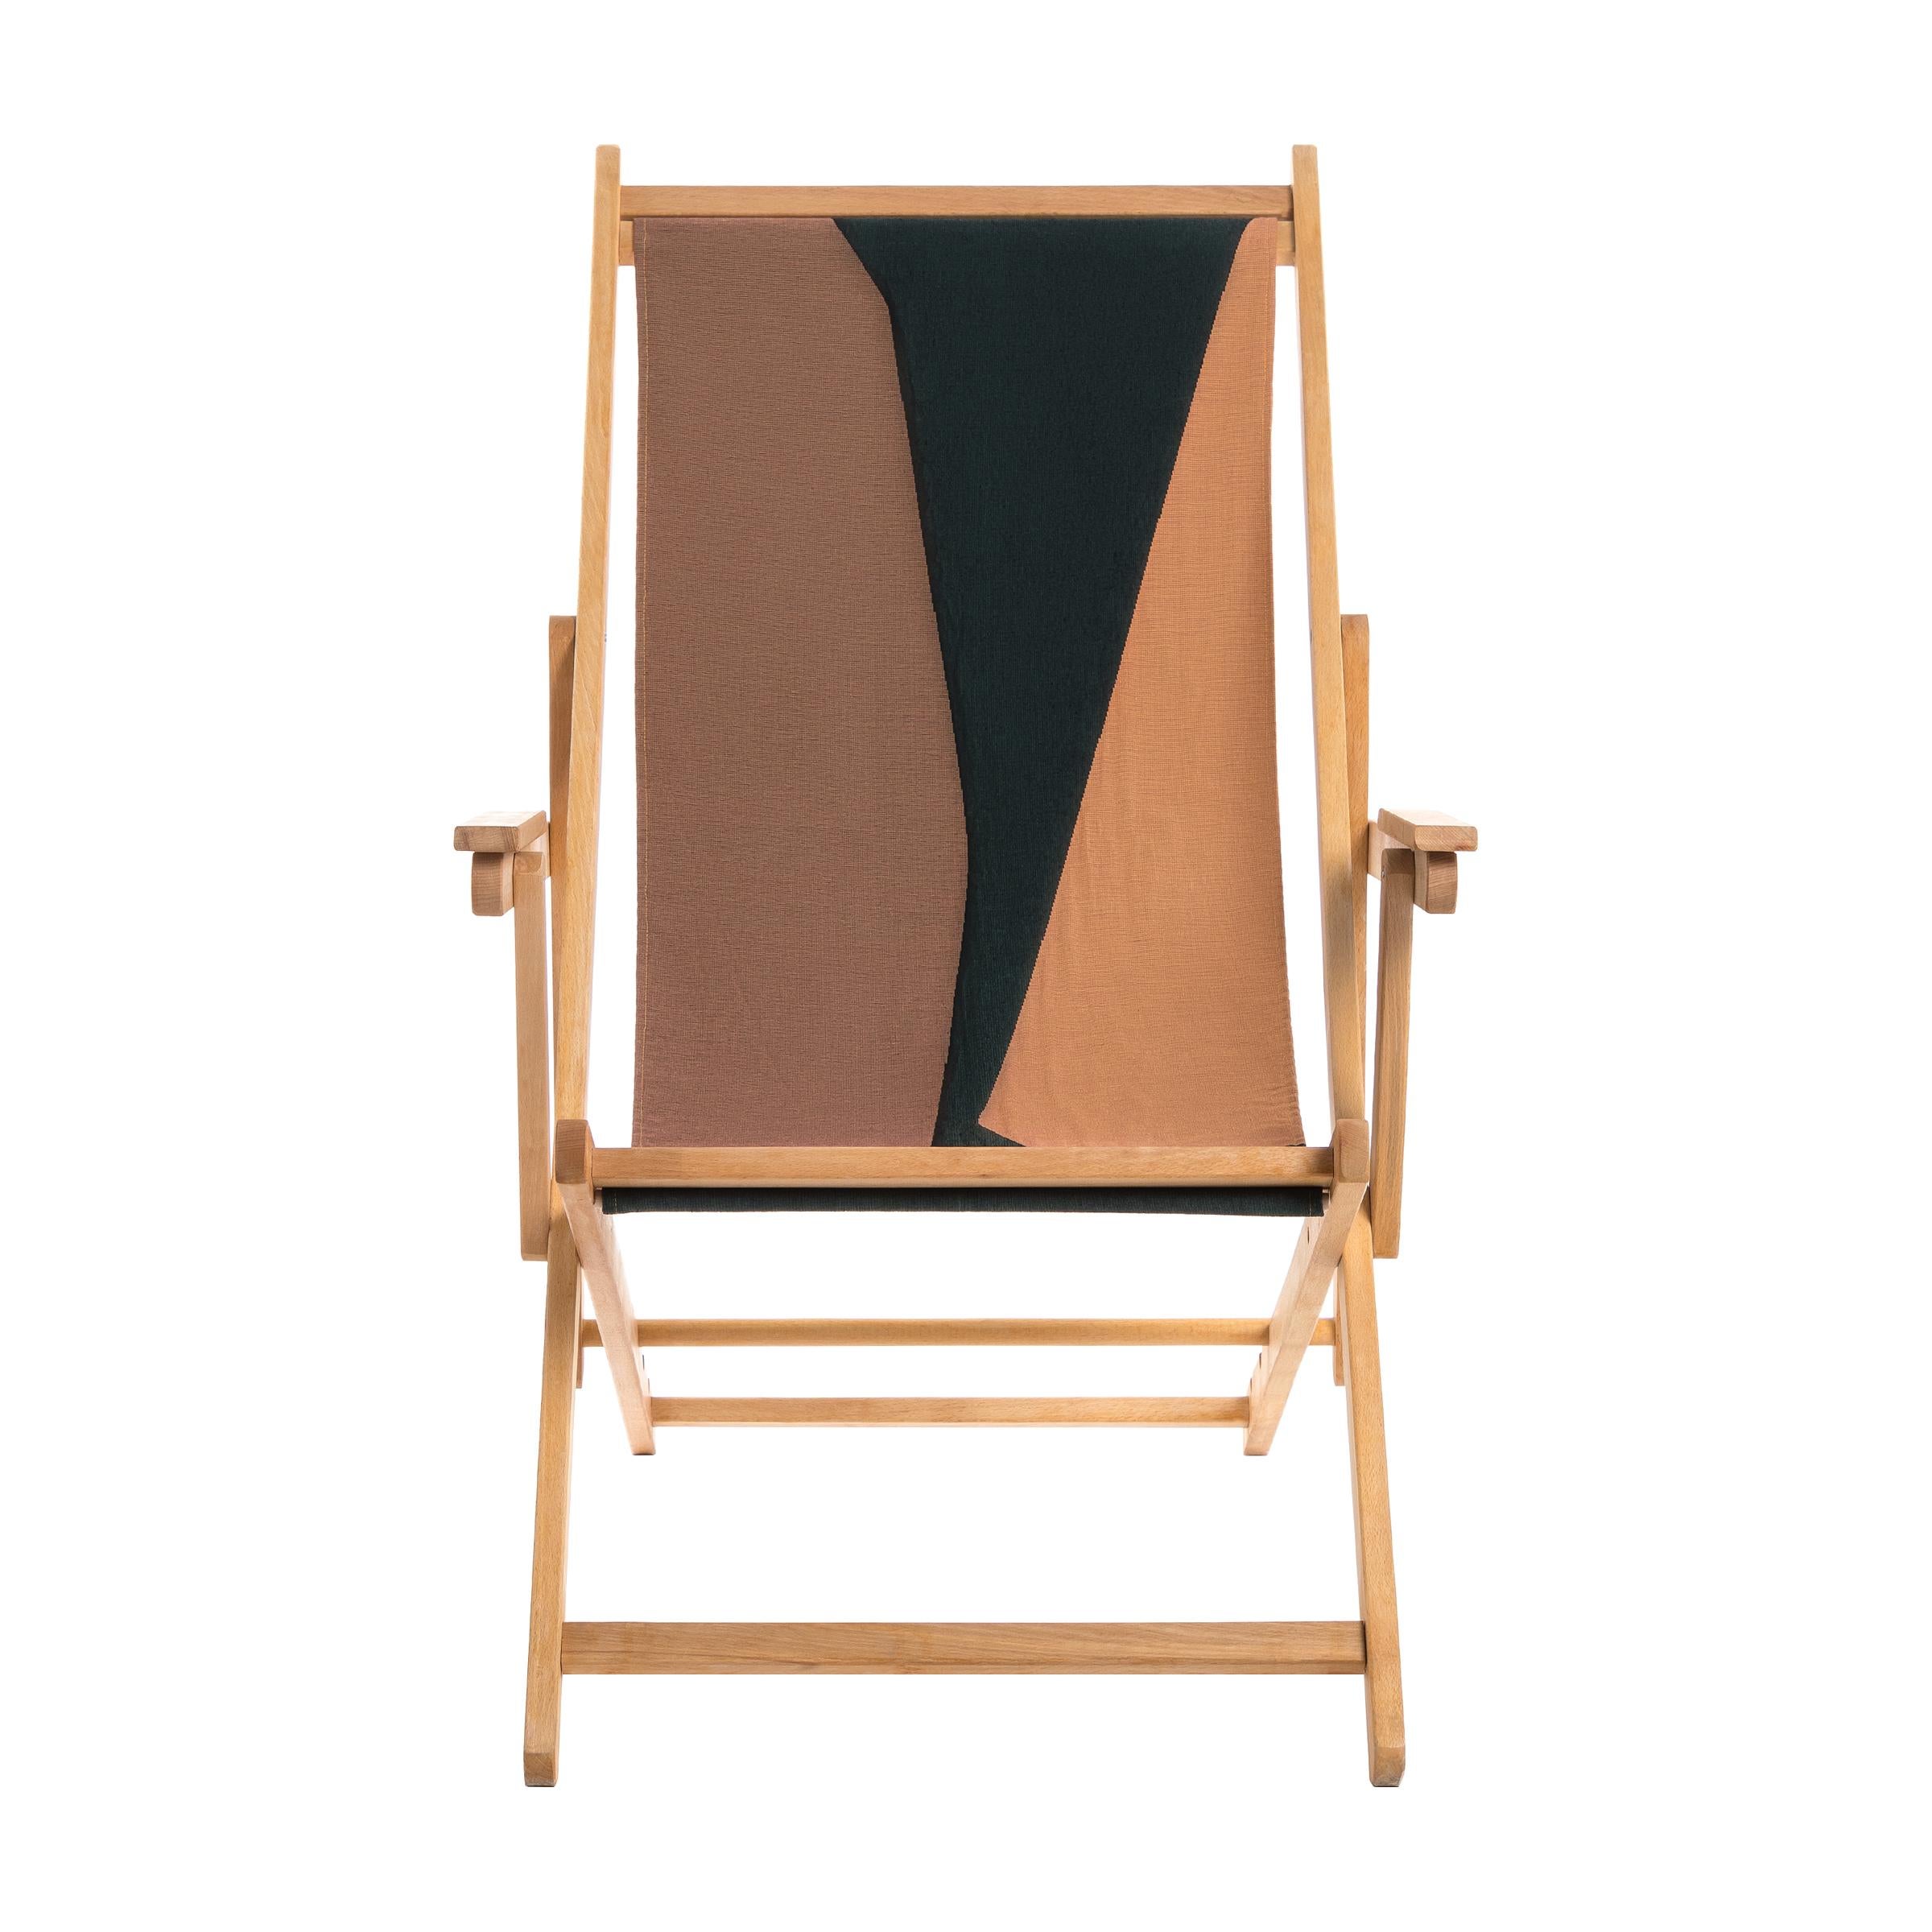 Following the tradition of the Mediterranean summer chair crafted by artisans in Spain in untreated teak wood with our unique cotton tapestry designs make this item both great for outdoor and indoor. Each of these chairs is unique in design,